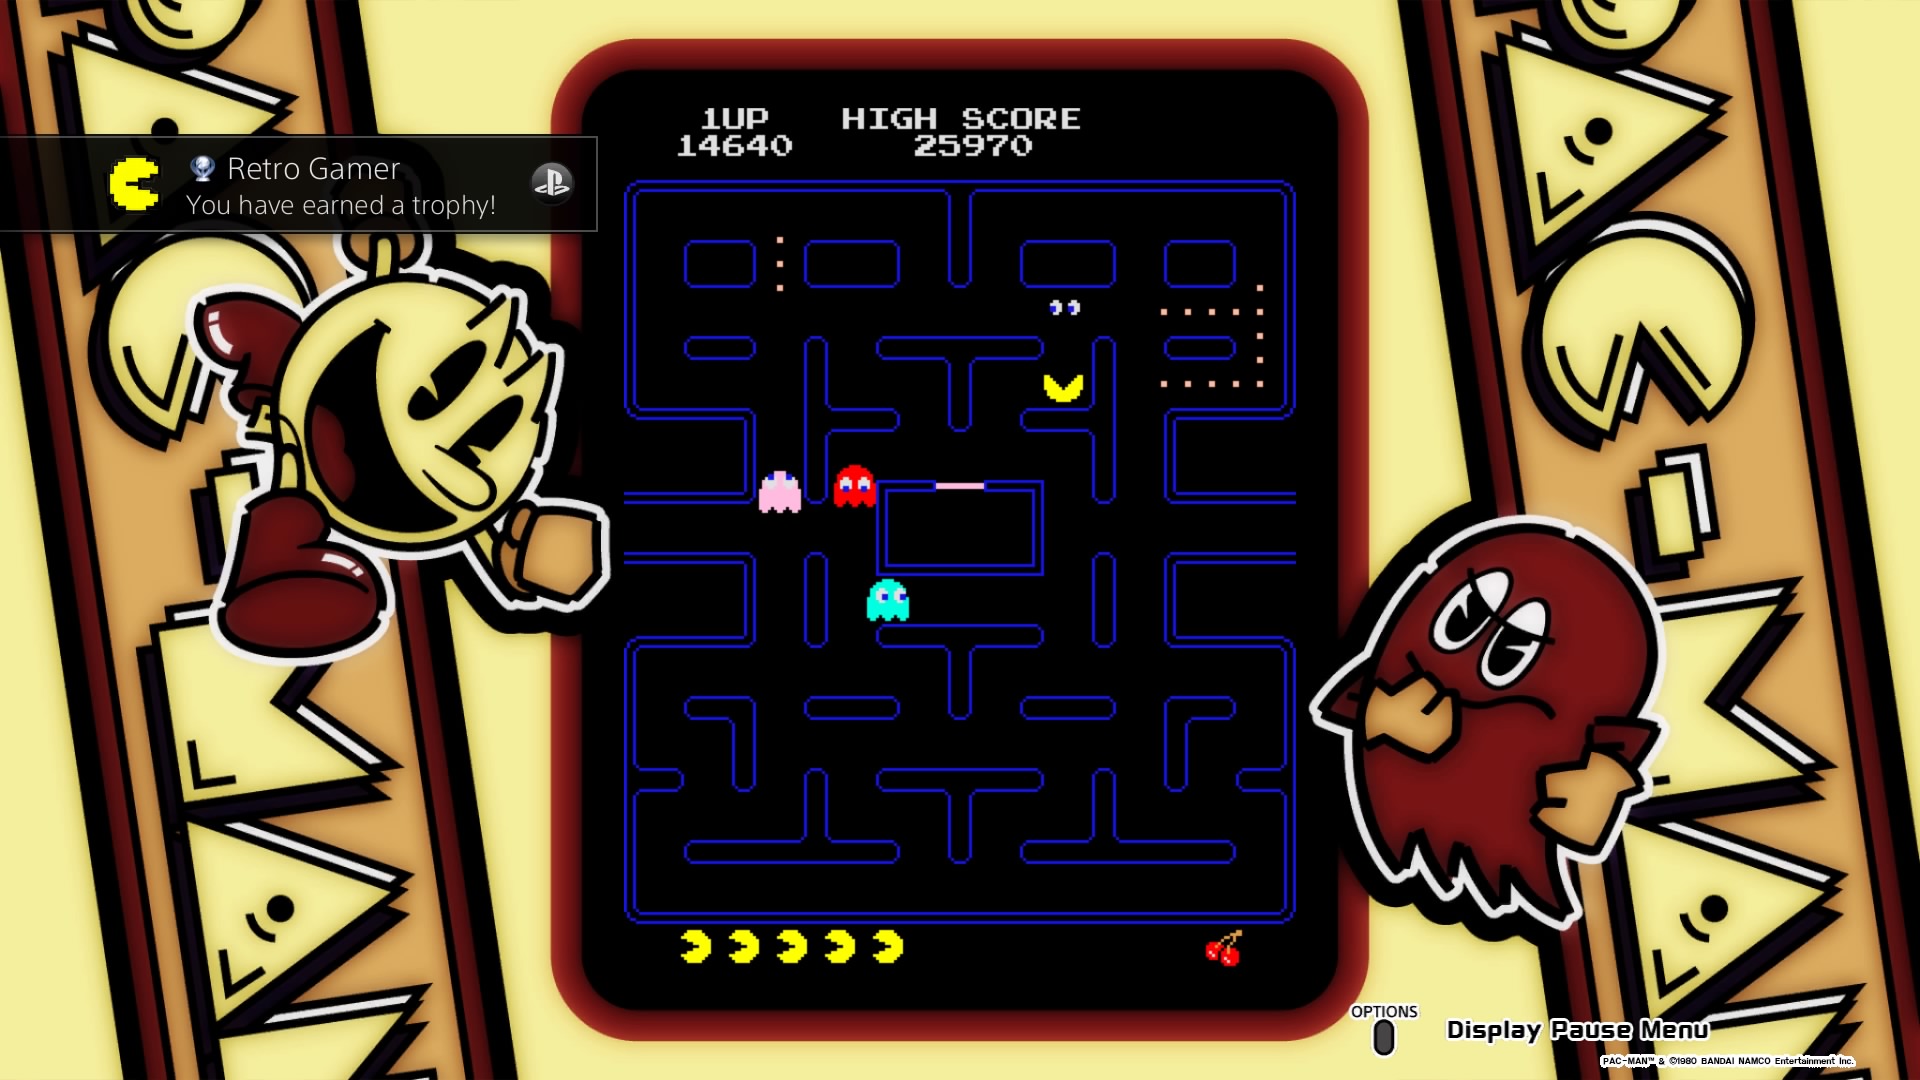 does pac man ps4 contain all levels